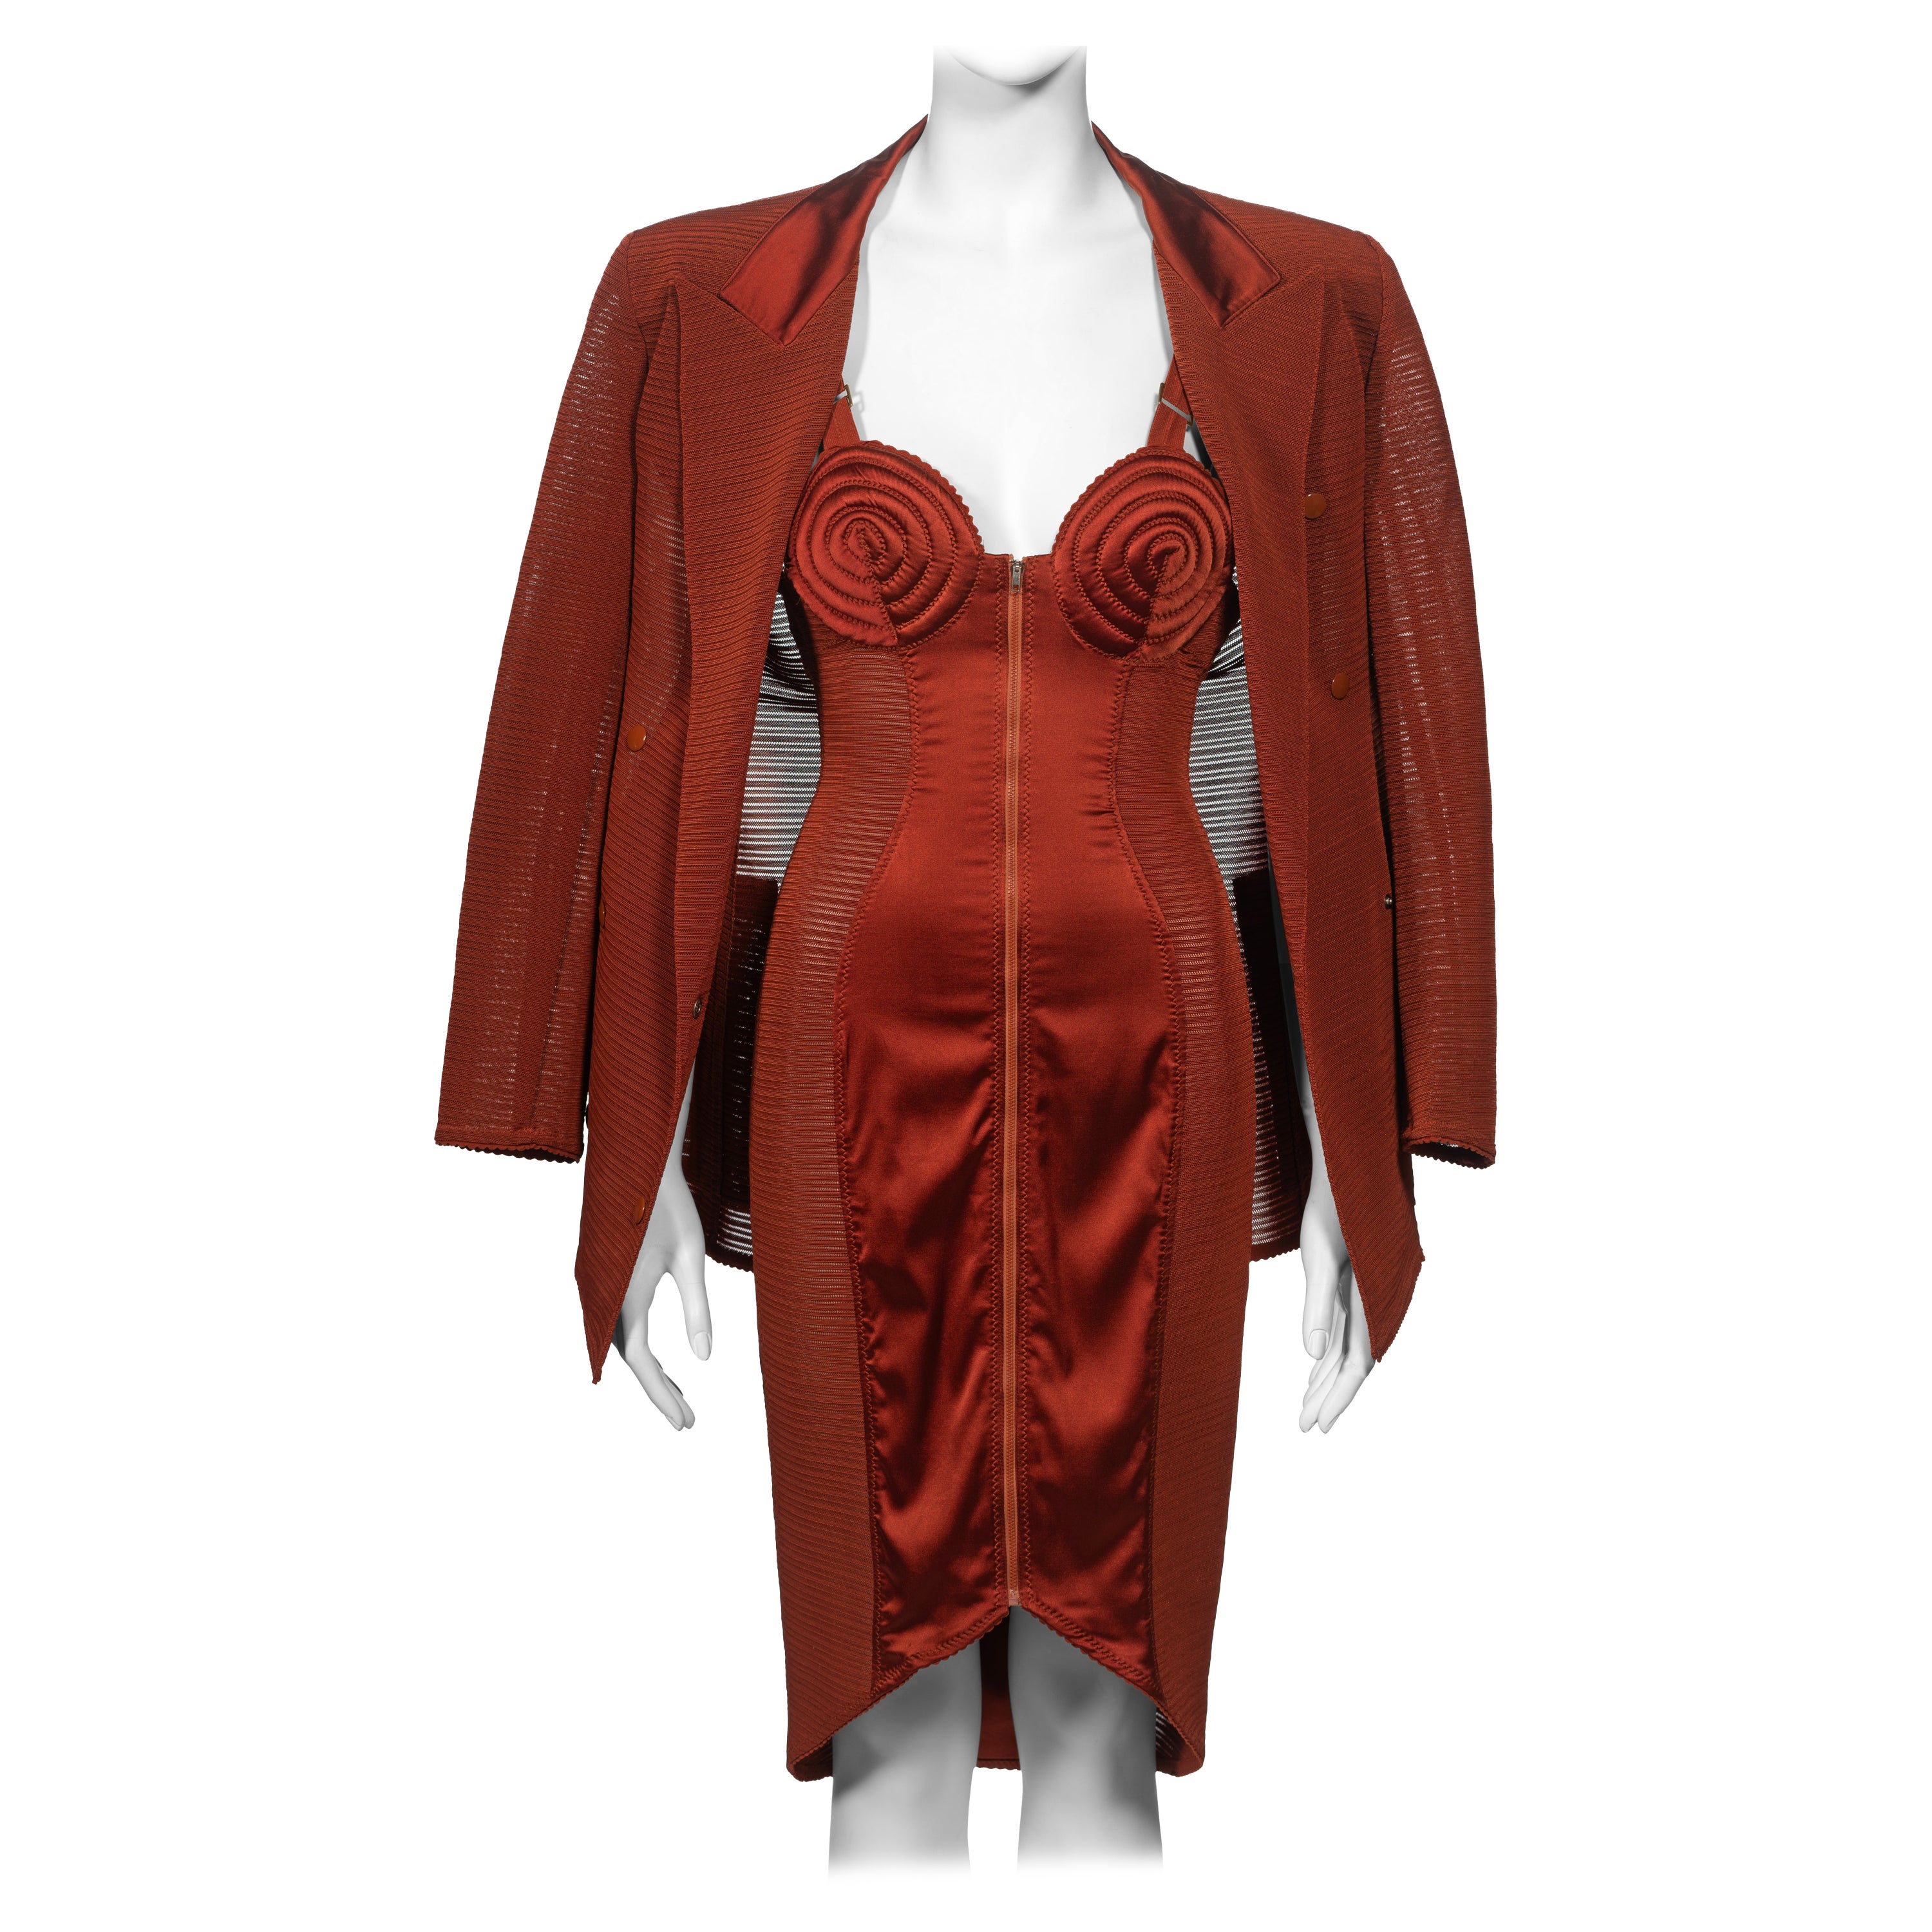 Jean Paul Gaultier Copper Cone Bra Evening Dress and Jacket Ensemble, ss 1987 For Sale